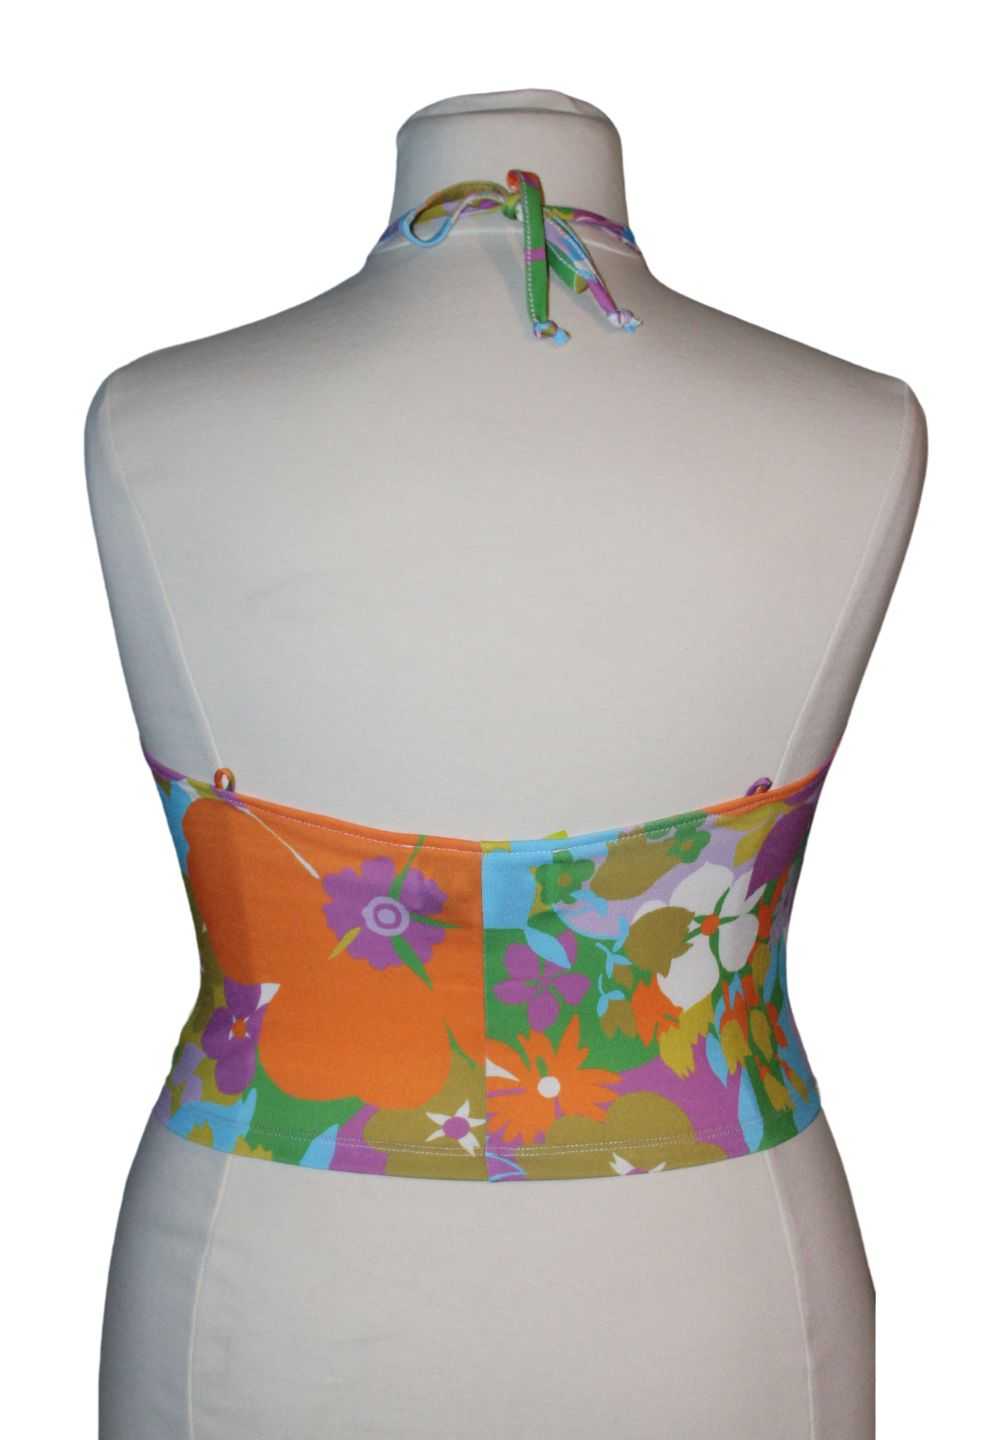 WRAY Floral Crop Top, Size 2XL - image 4